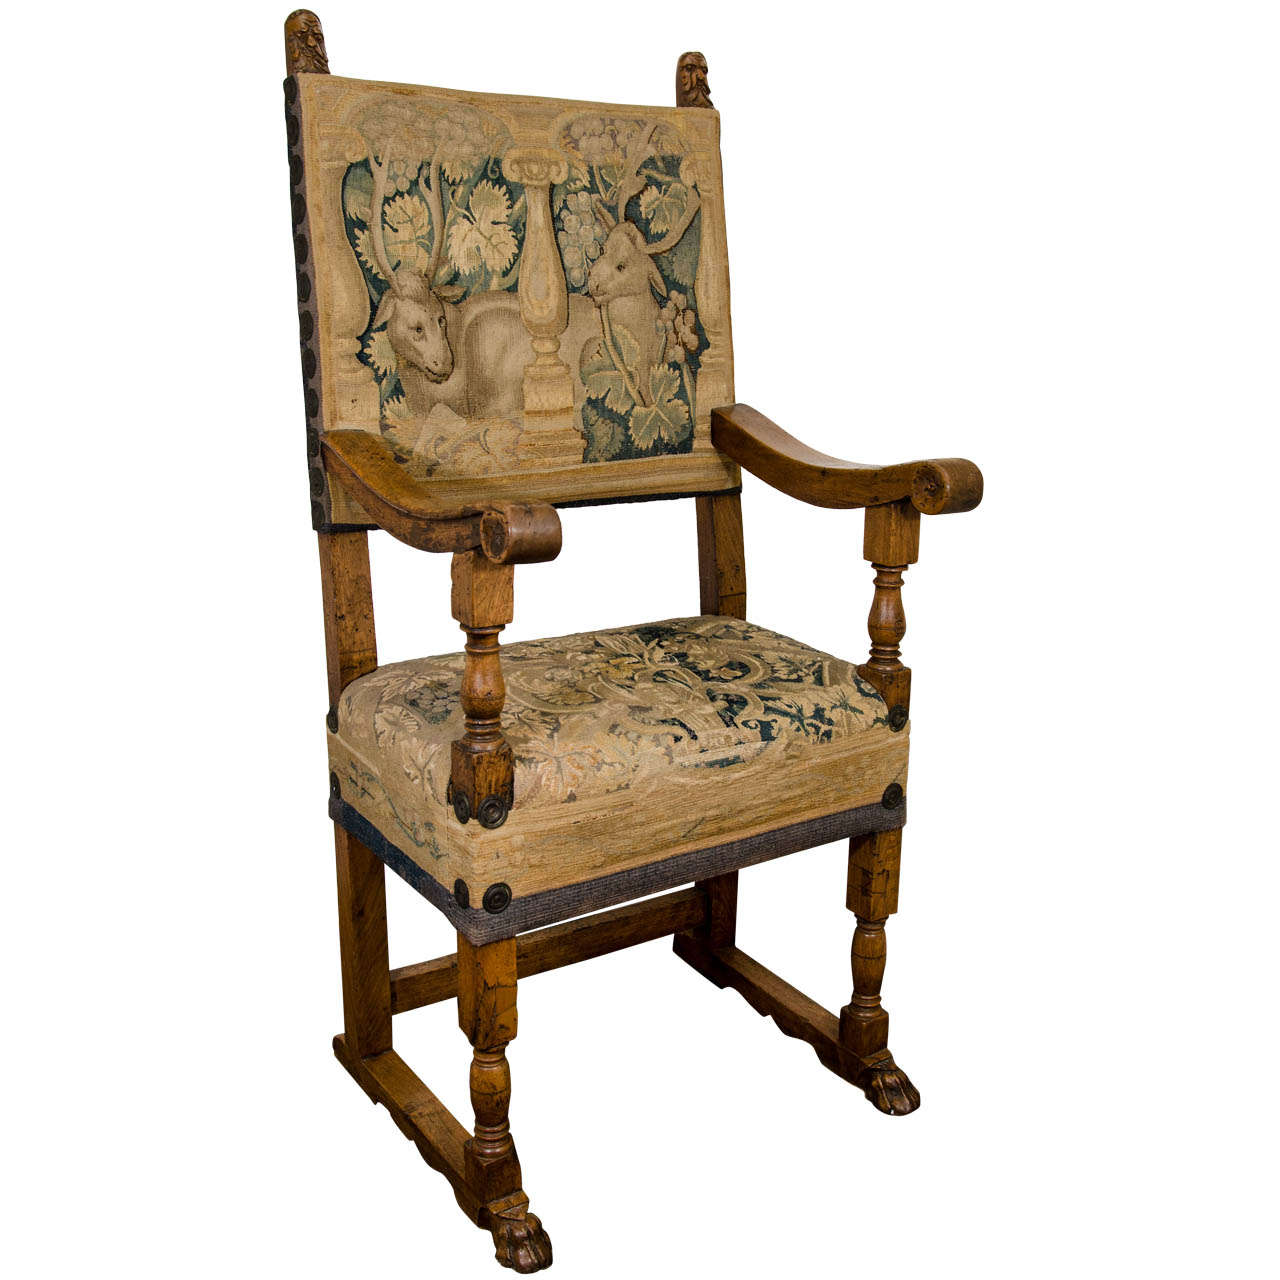 A 19th Century Carved Wooden Armchair with Tapestry Upholstery